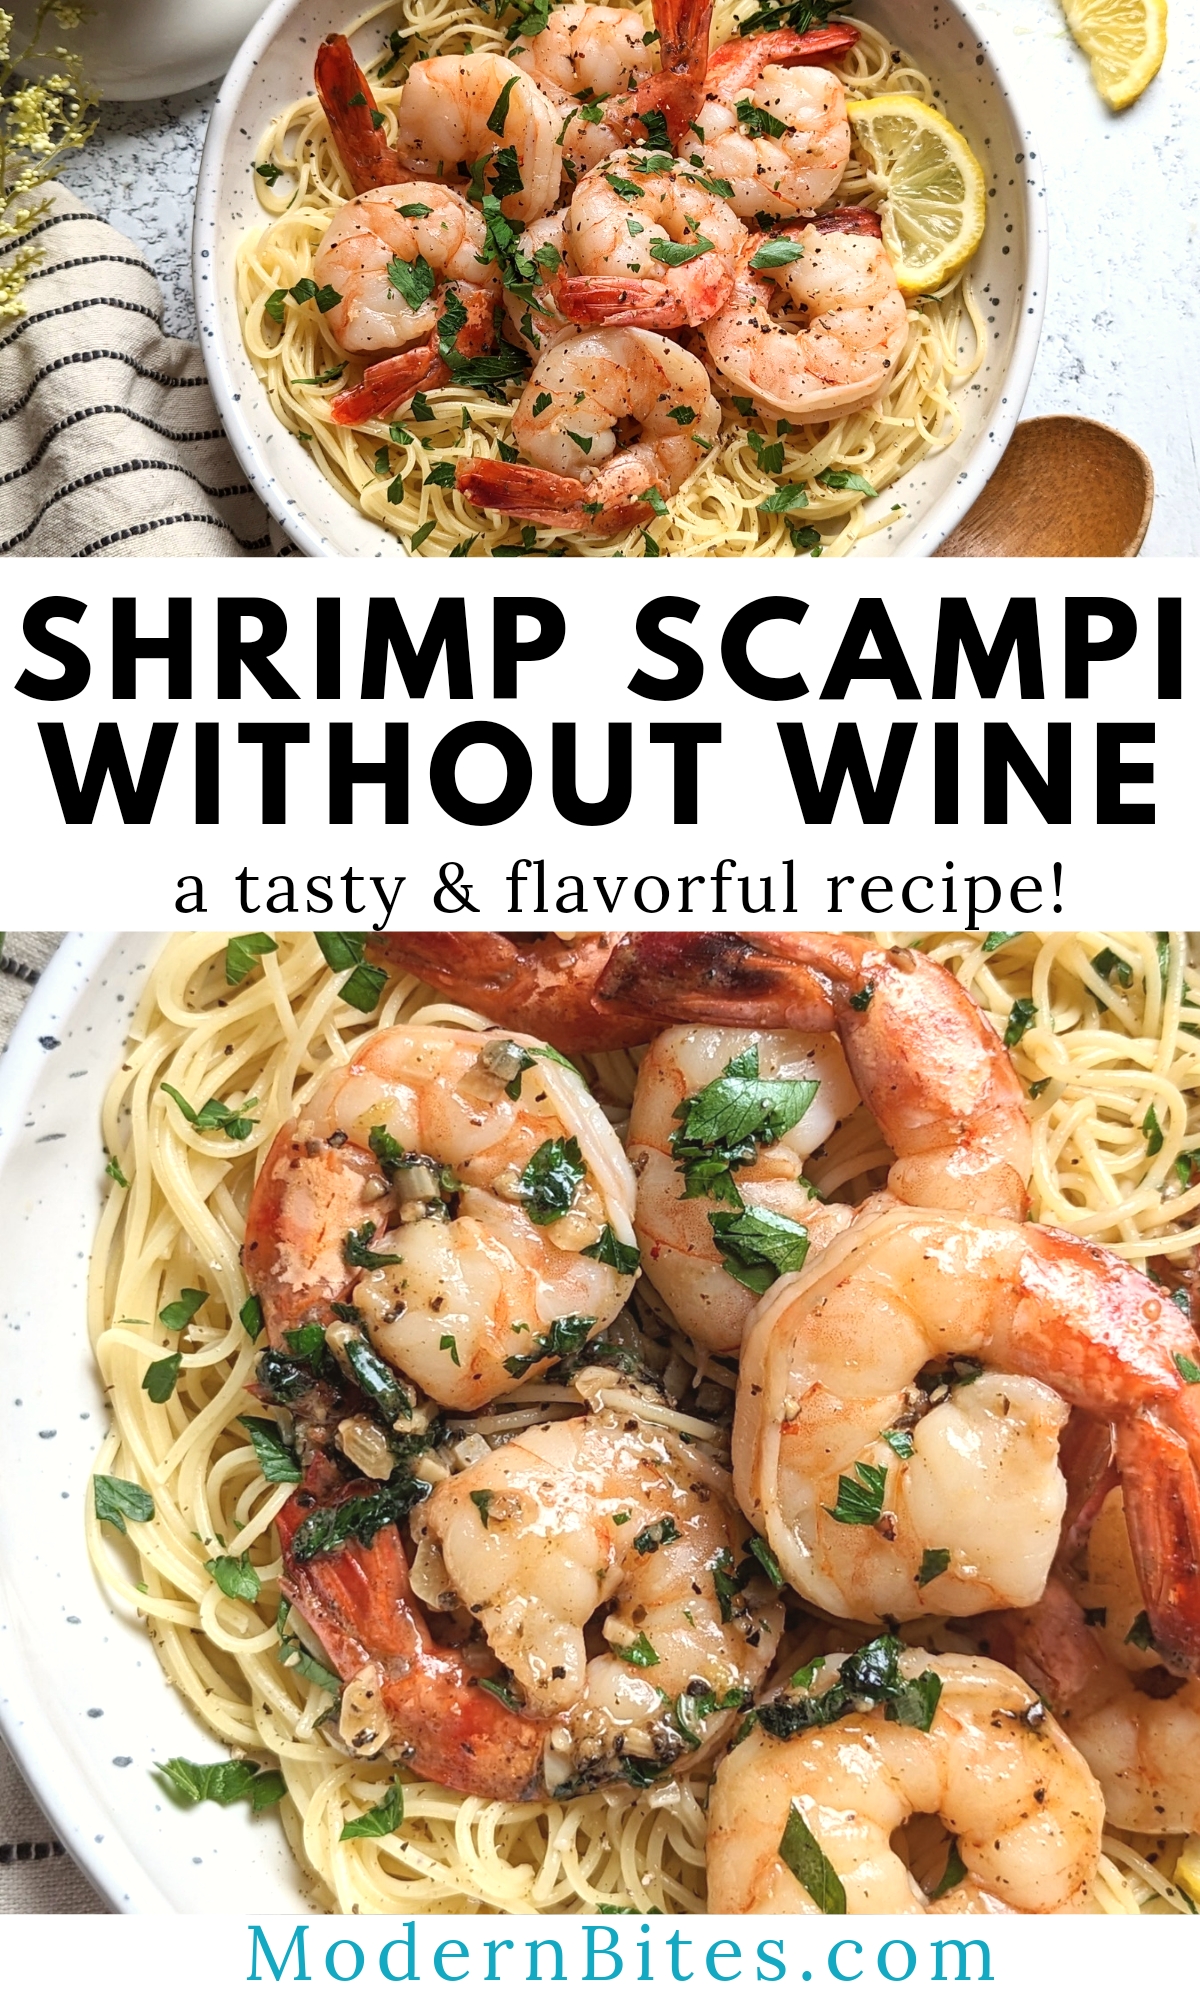 shrimp scampi recipe without wine easy chicken stock scampi no wine hearty keto low carb dinner ideas